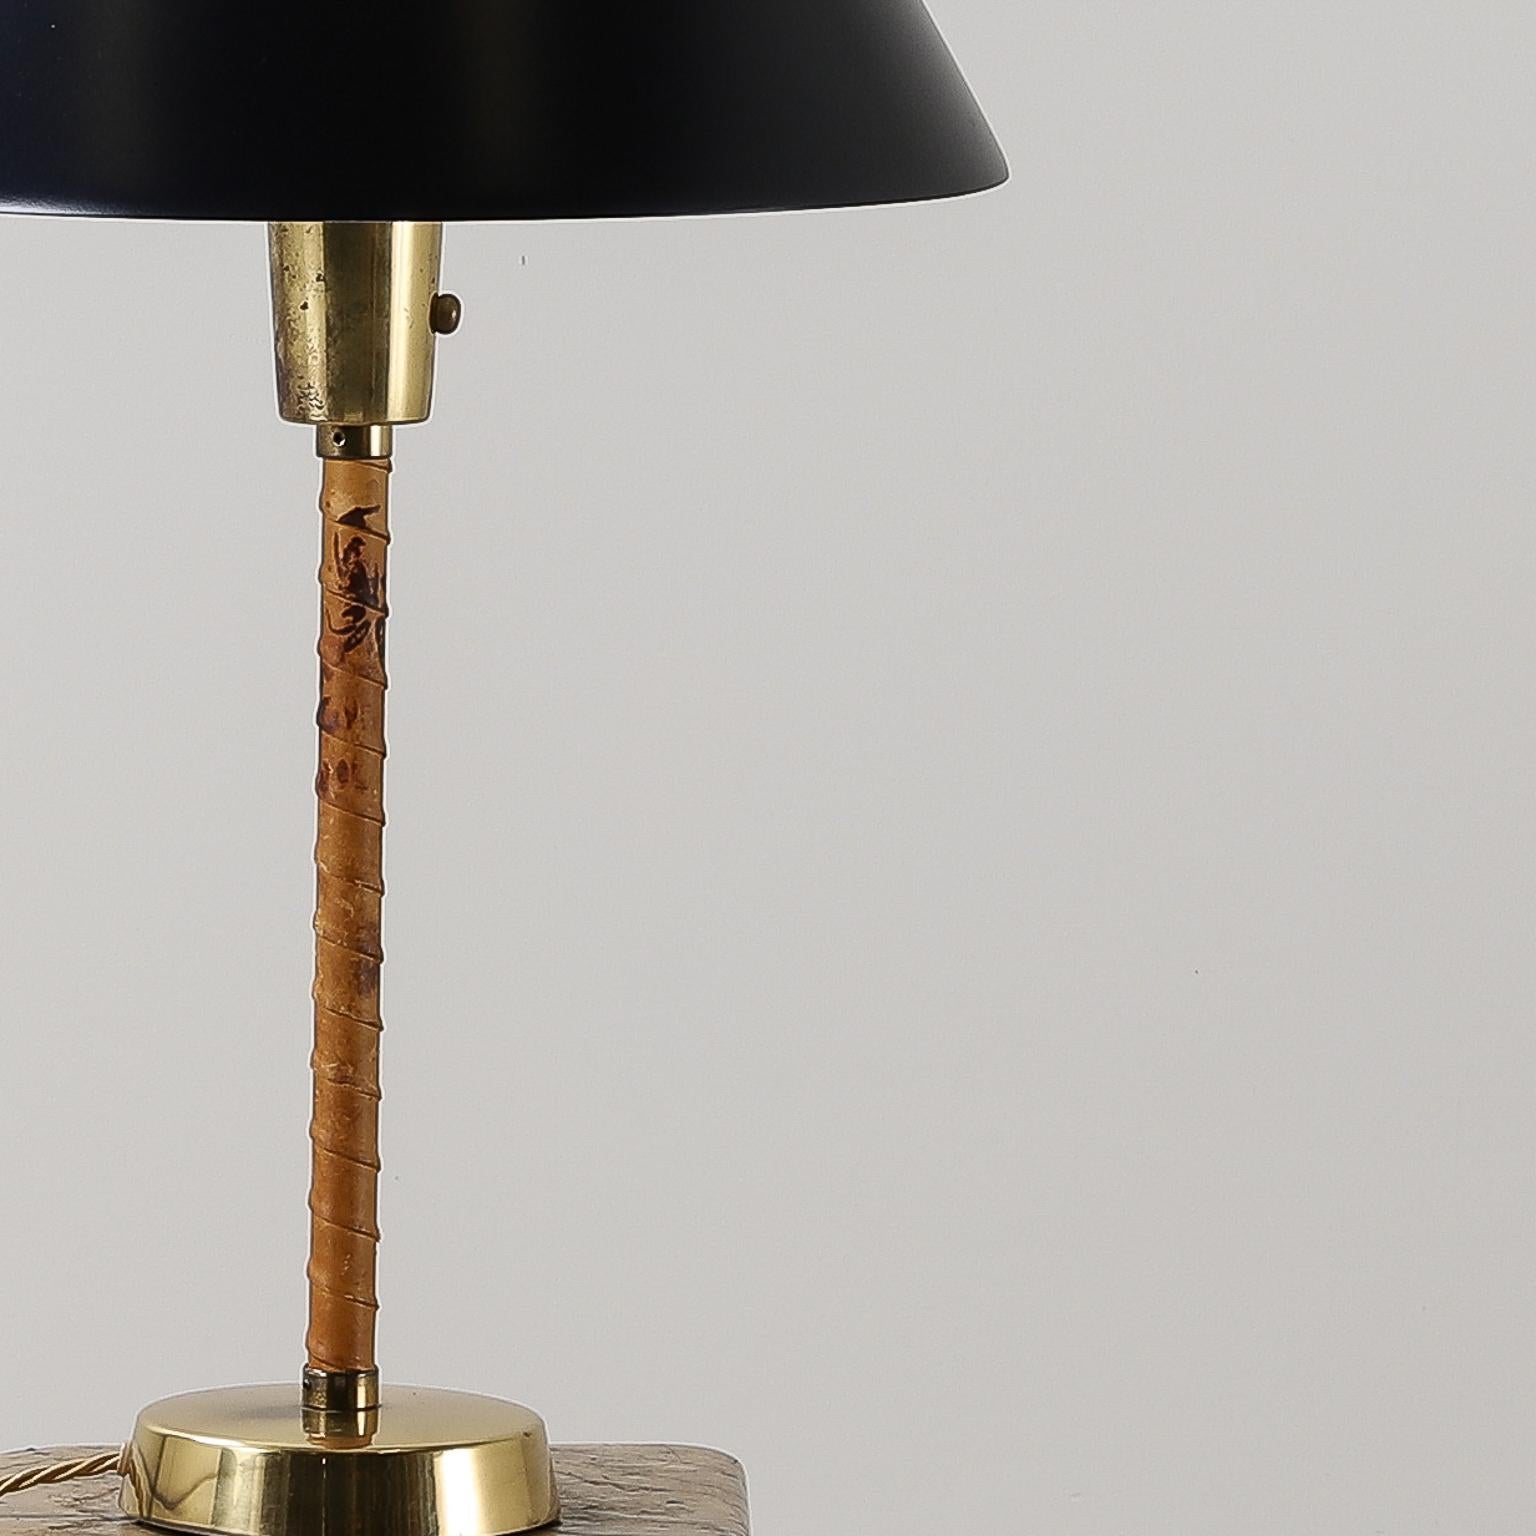 Lacquered Senator Table Lamps by Lisa Johansson-Pape for Orno, 1947